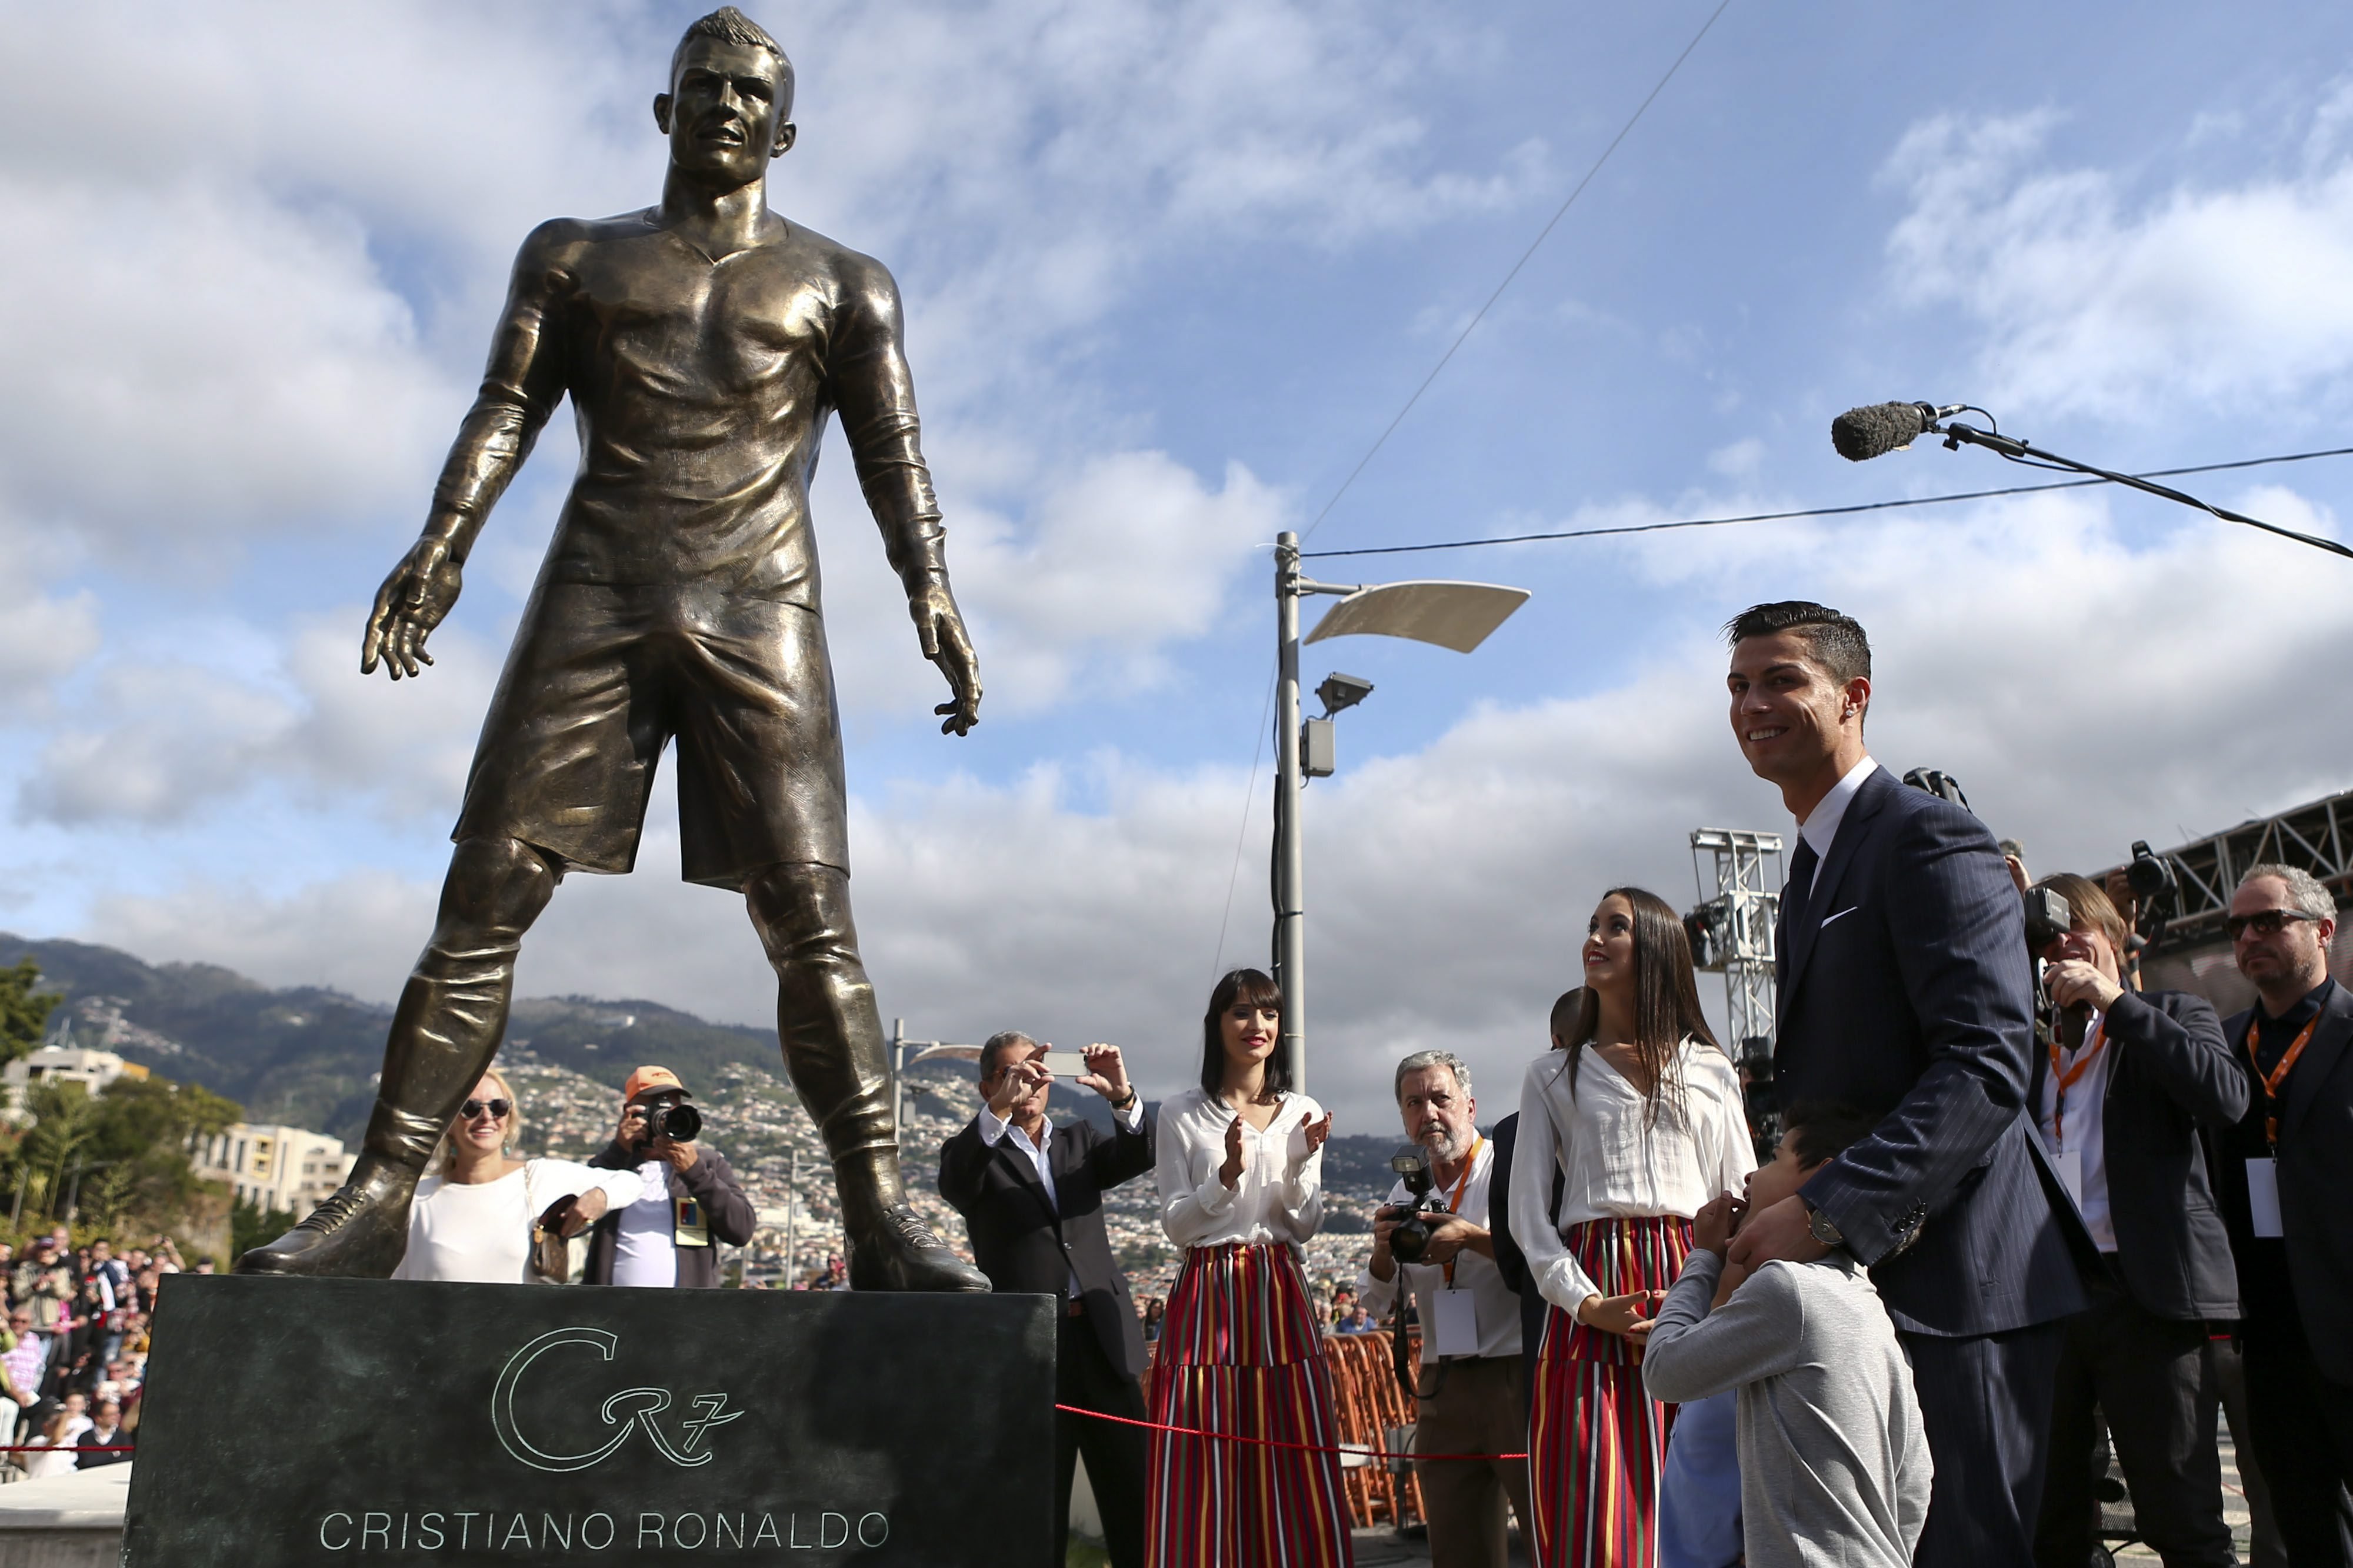 Portuguese soccer player Cristiano Ronaldo from Real Madrid poses during the unveiling ceremony of a statue of himself in his hometown of Funchal, Madeira Island on Dec. 21 2014. (Jose Sena Goulao—EPA)